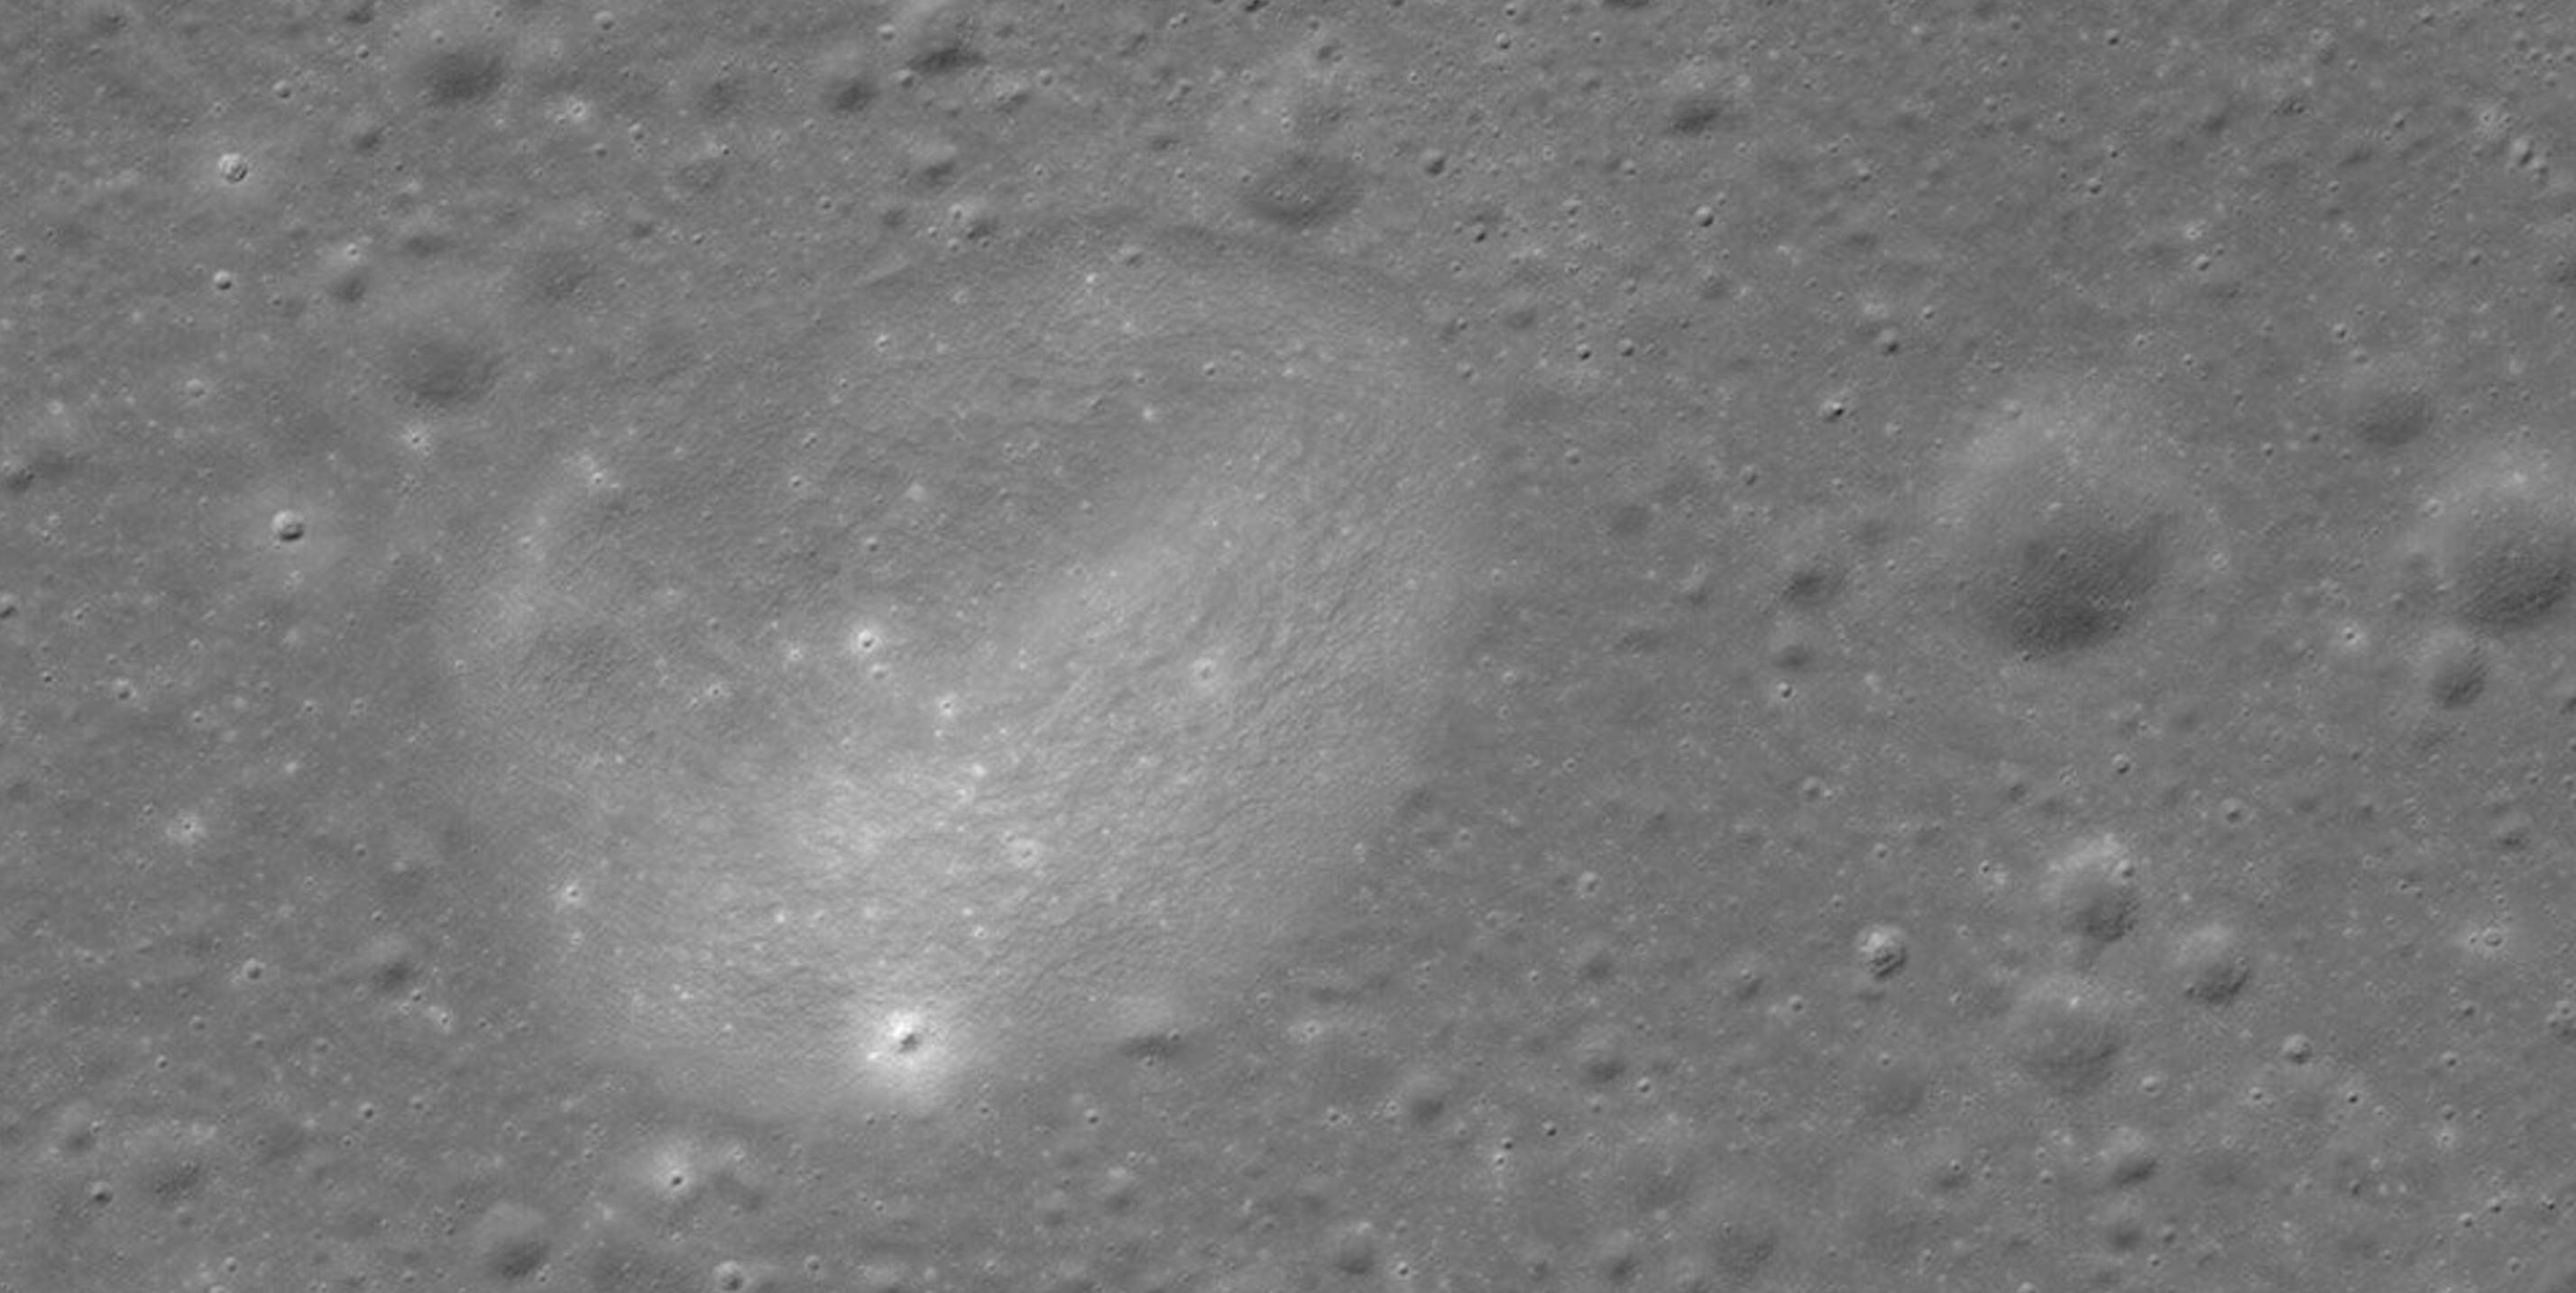 Magnified view of the region of the moon Oceanus Procellarum, captured on January 13, 2023 by South Korea's Danuri spacecraft.